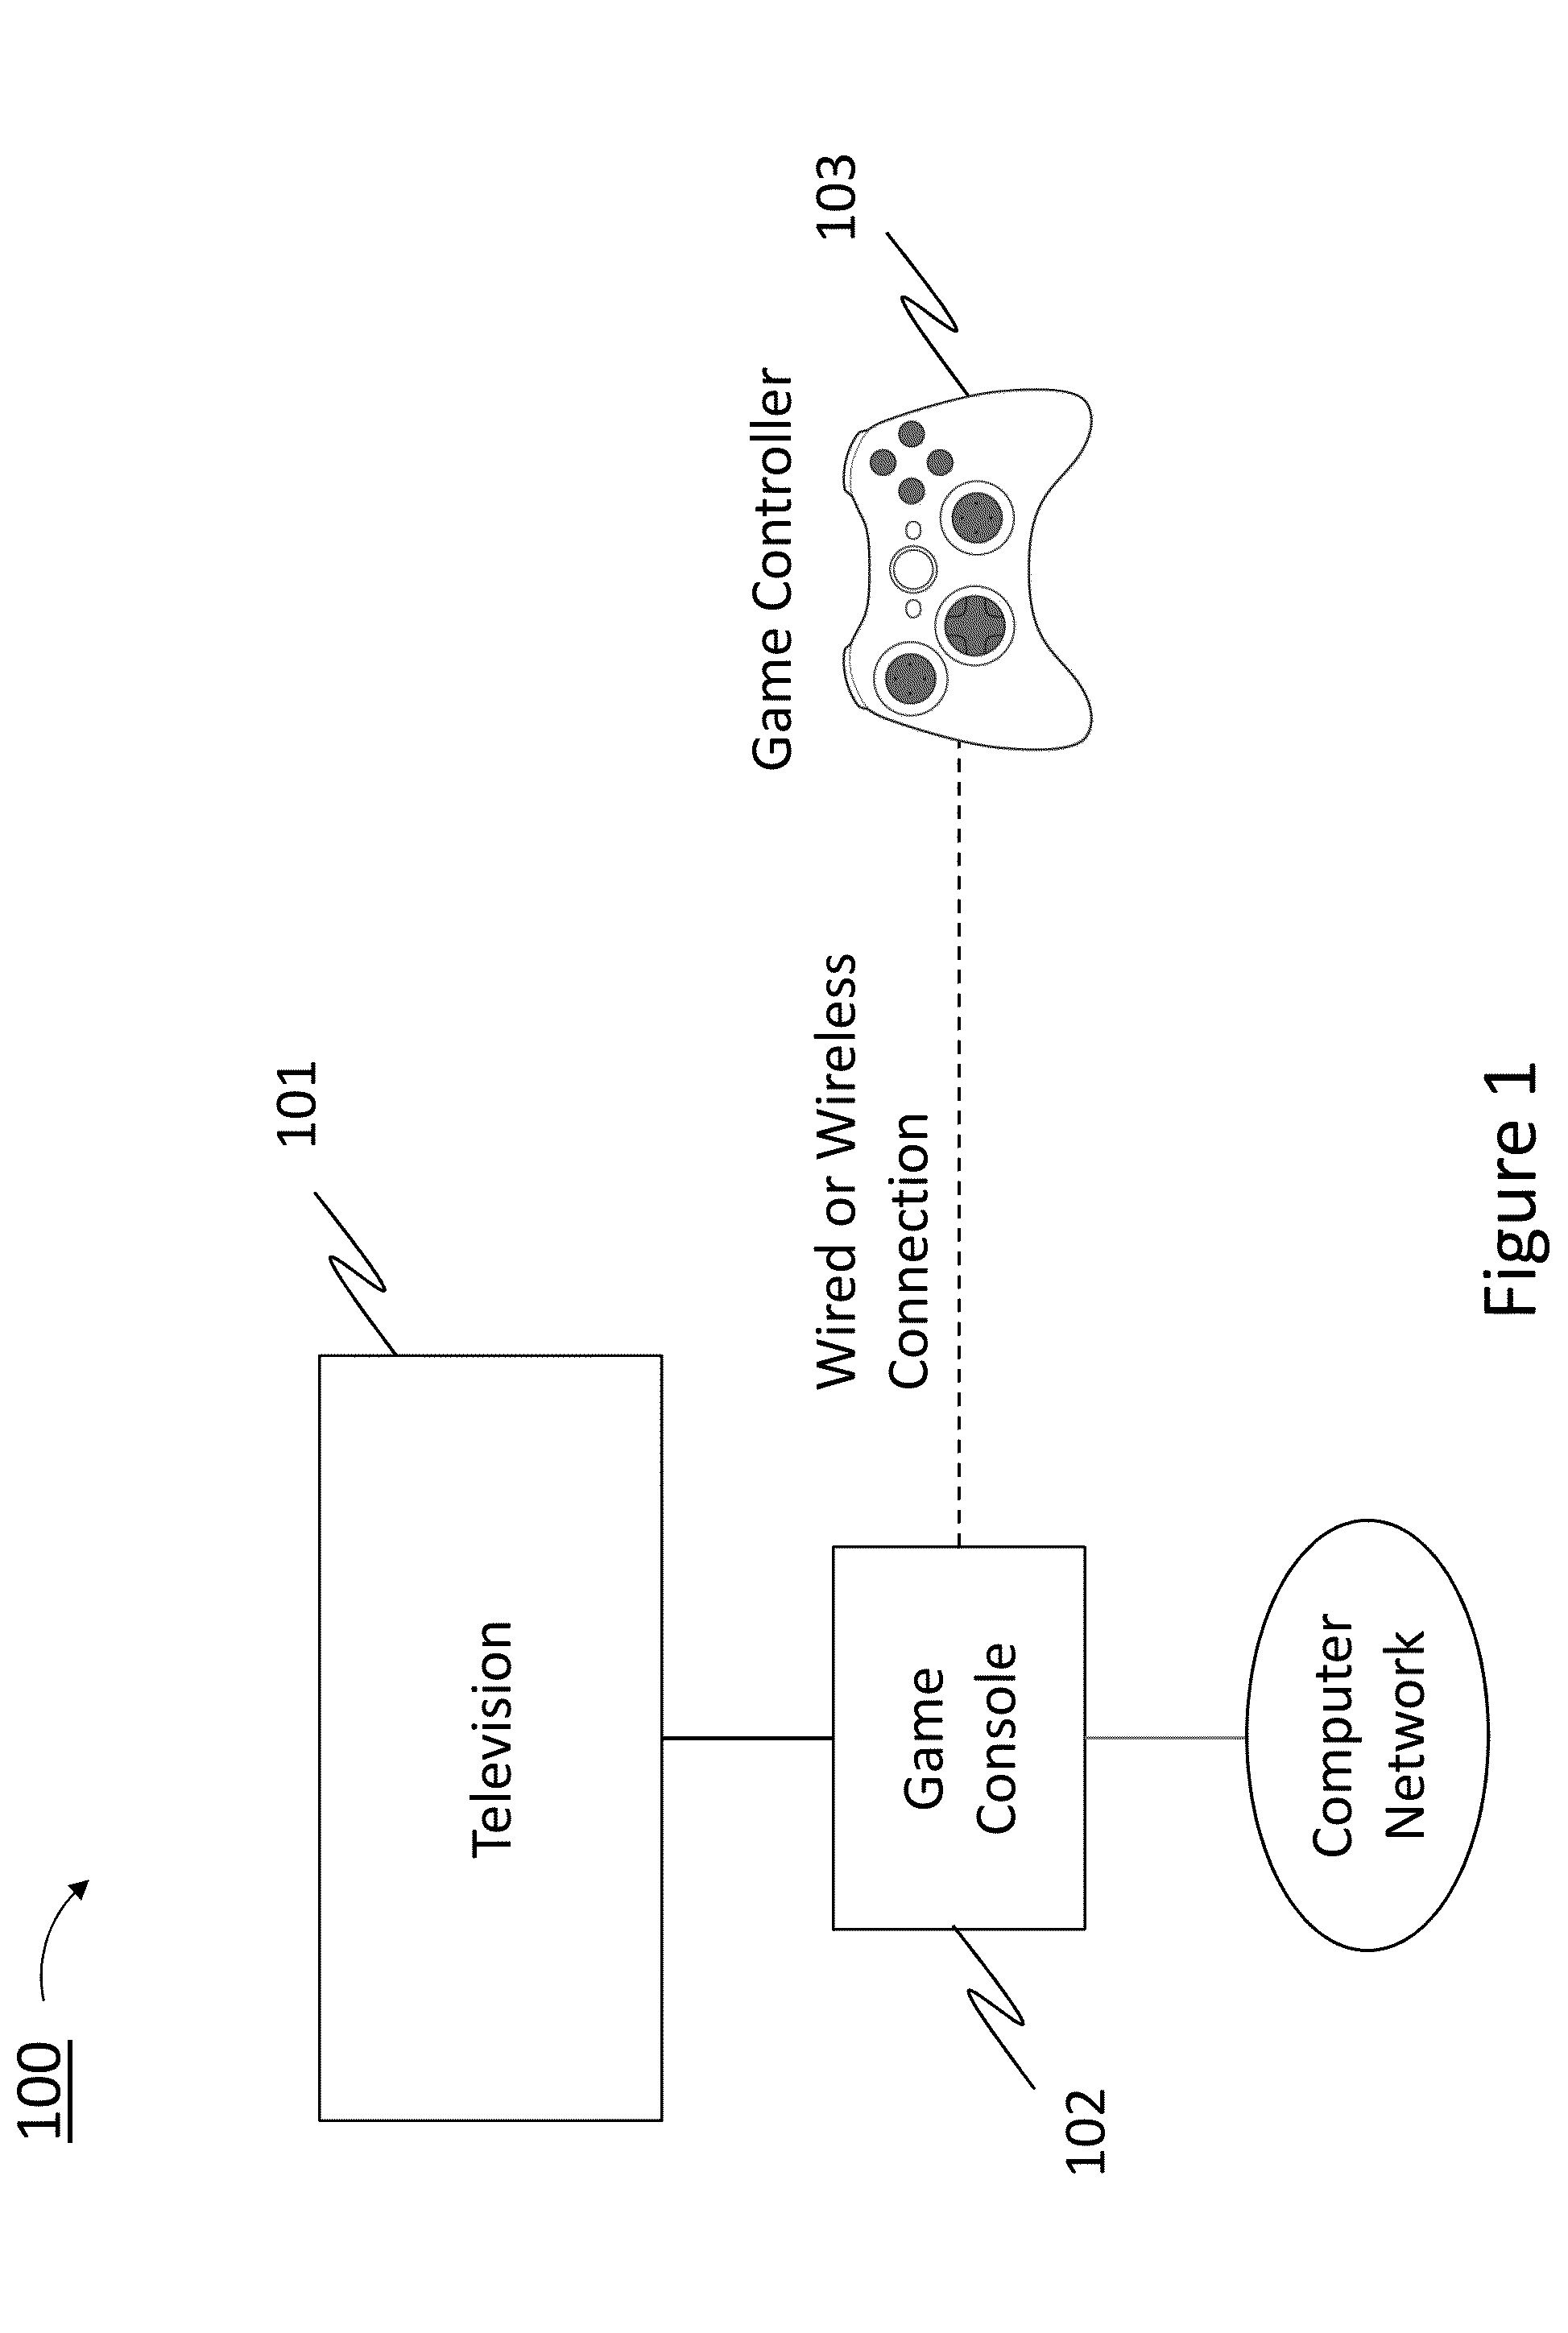 Method and system for video gaming using input adaptation for multiple input devices